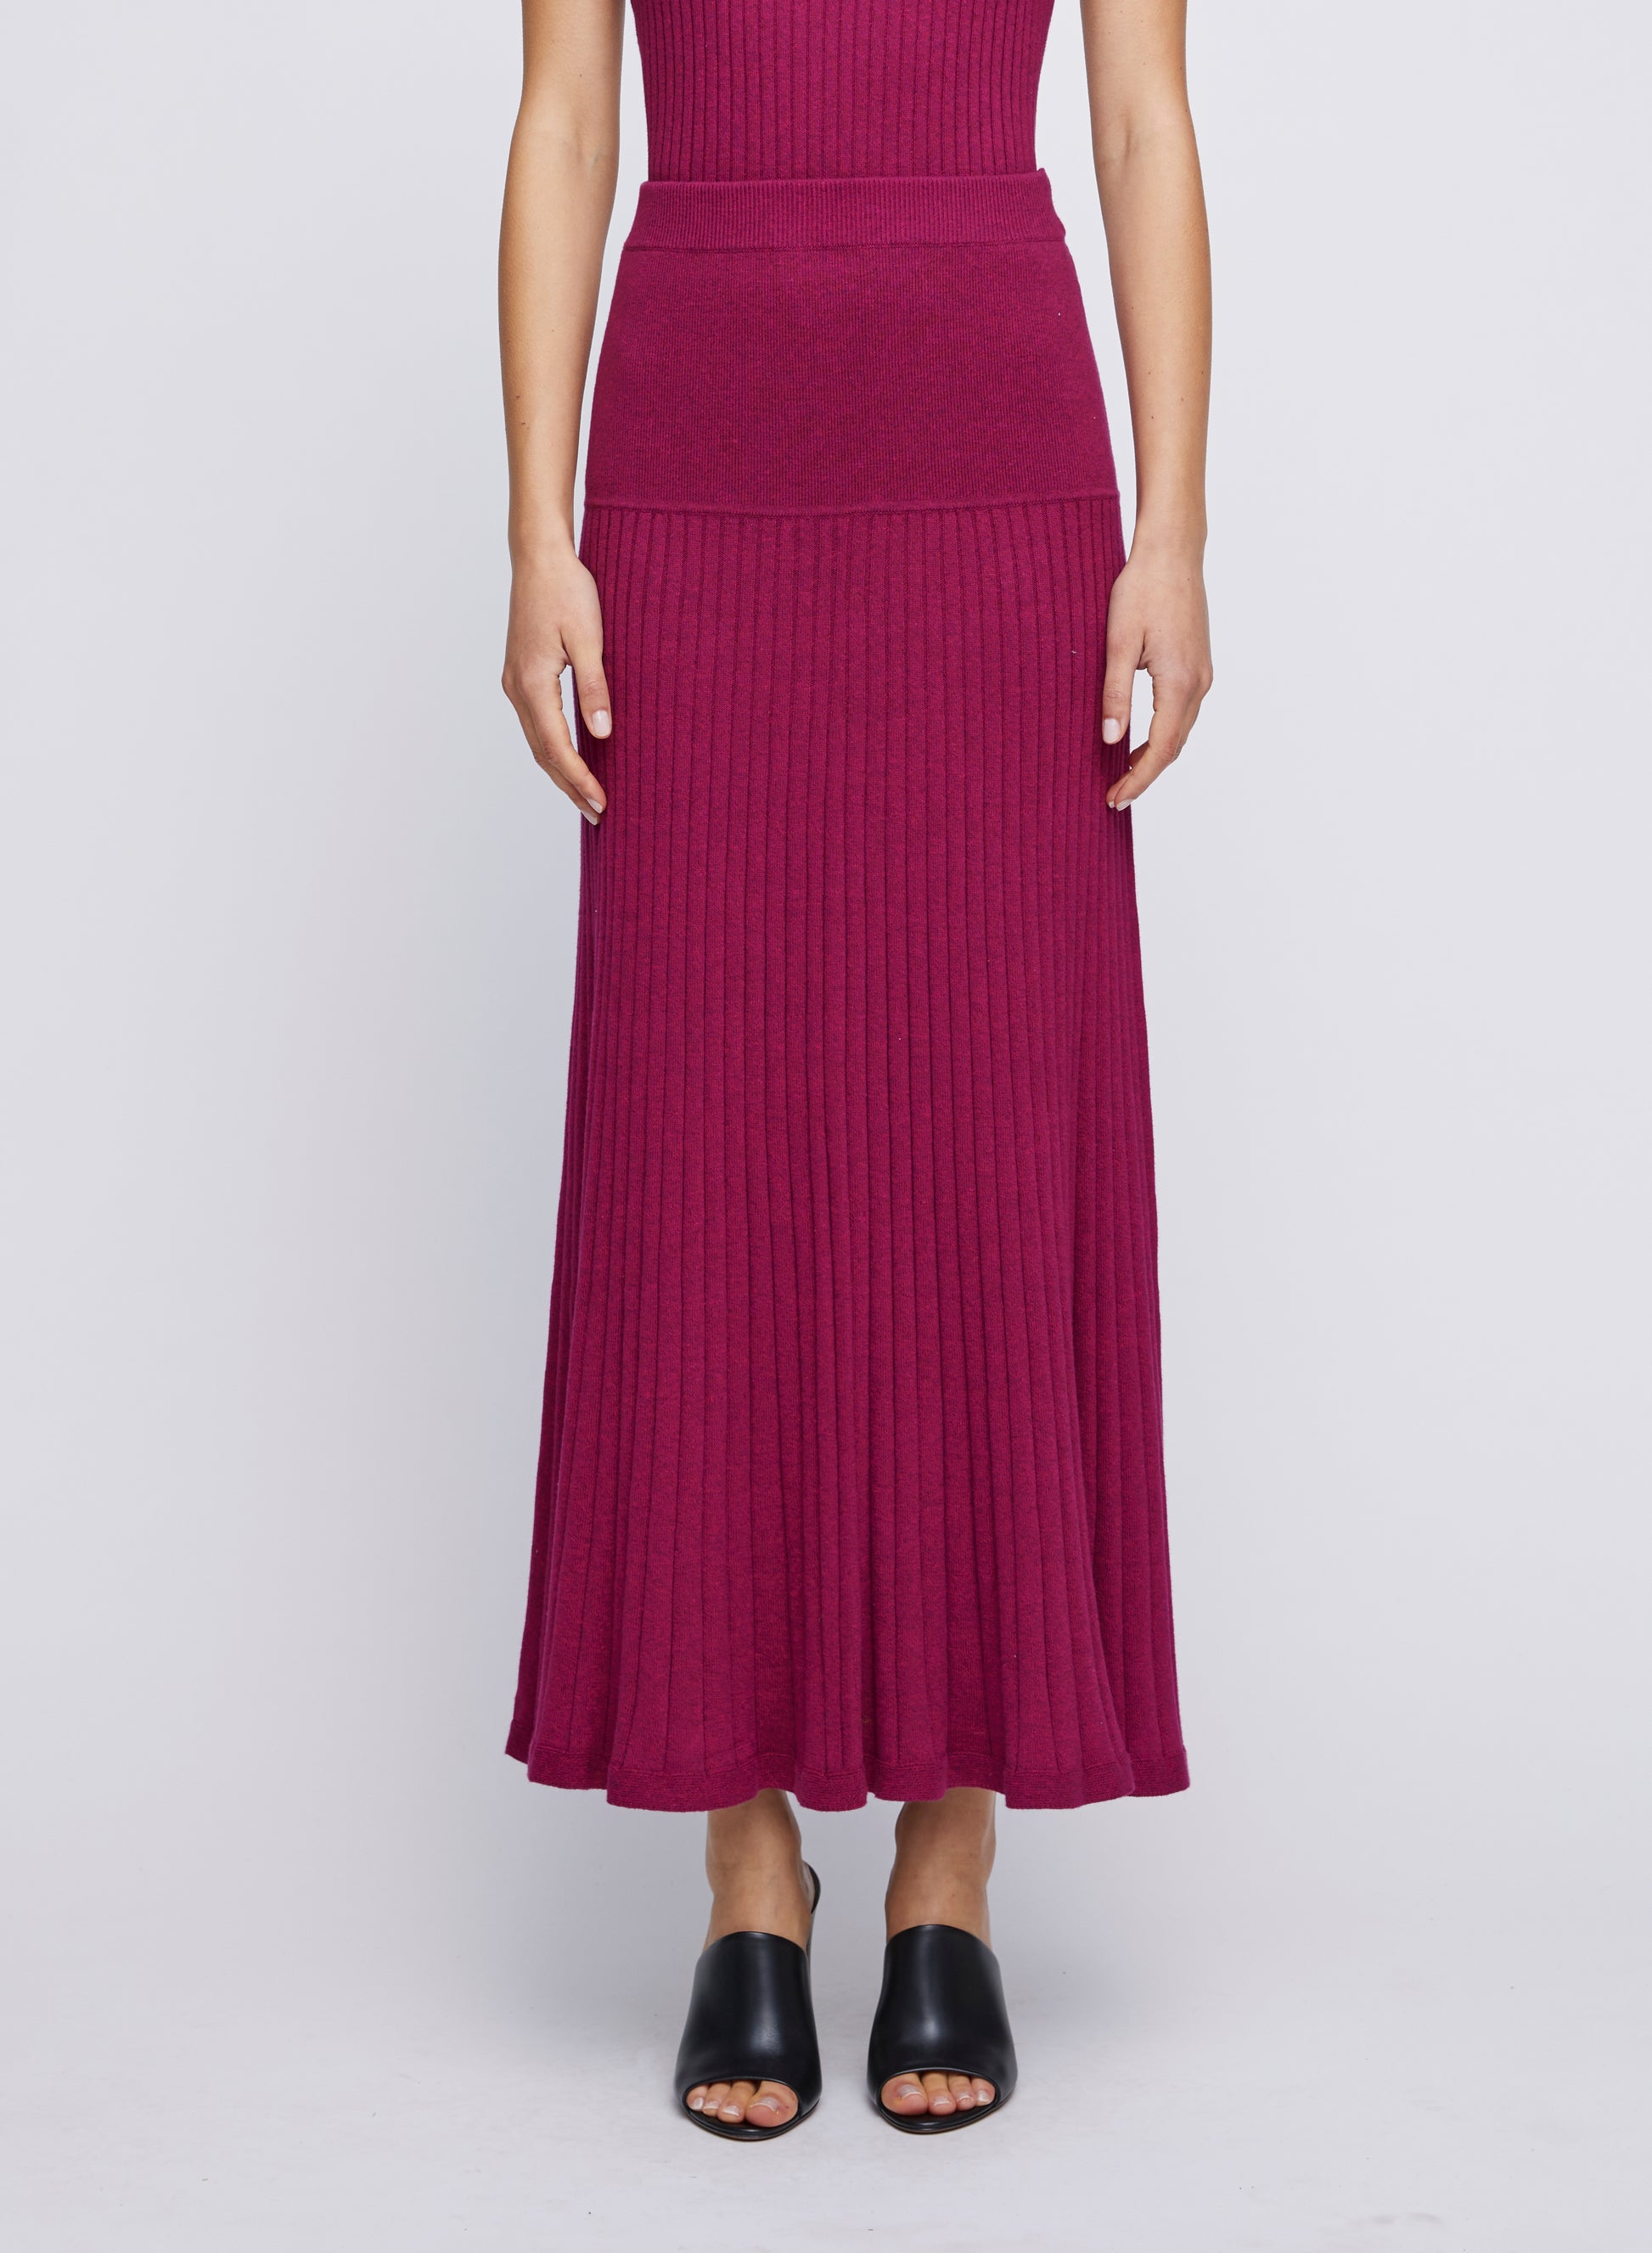 Cotton rib panelled A-line skirt with elasticated waistband. Knit skirt, red skirts, cherry skirts, full length skirts, casual skirts, everyday skirts, skirts for work.